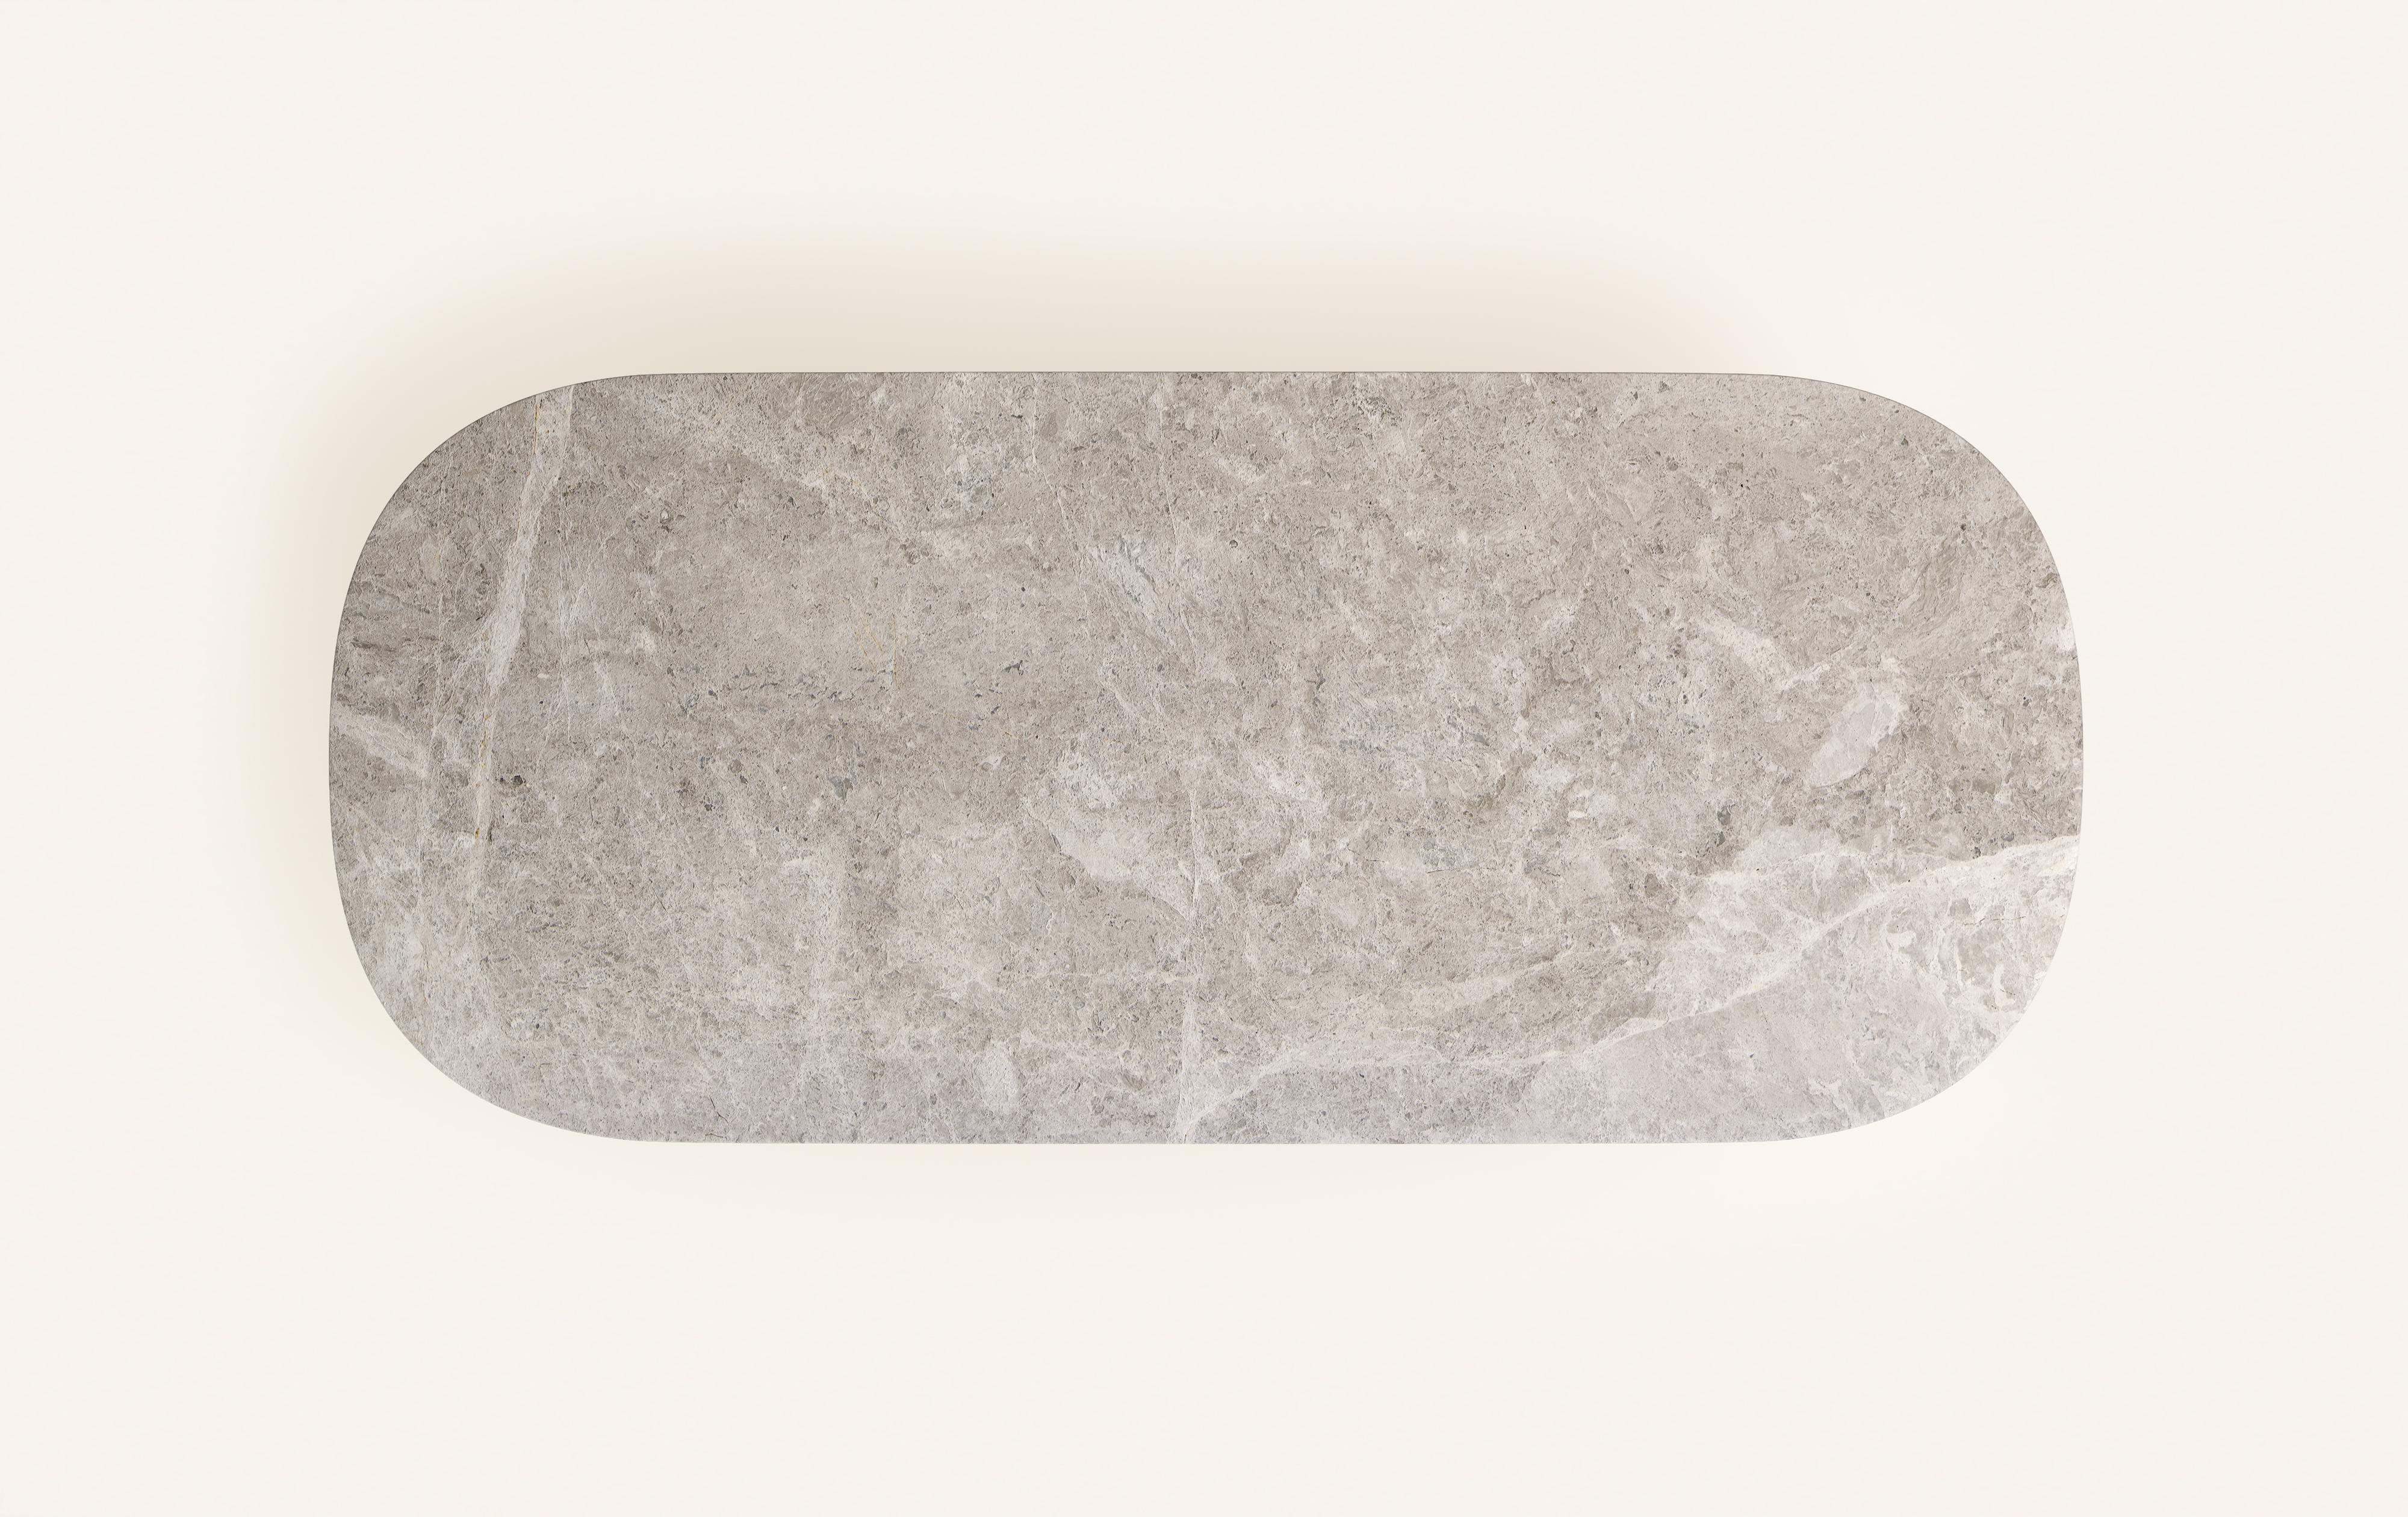 FORM(LA) Cono Oval Dining Table 118”L x 48”W x 30”H Tundra Gray Marble In New Condition For Sale In Los Angeles, CA